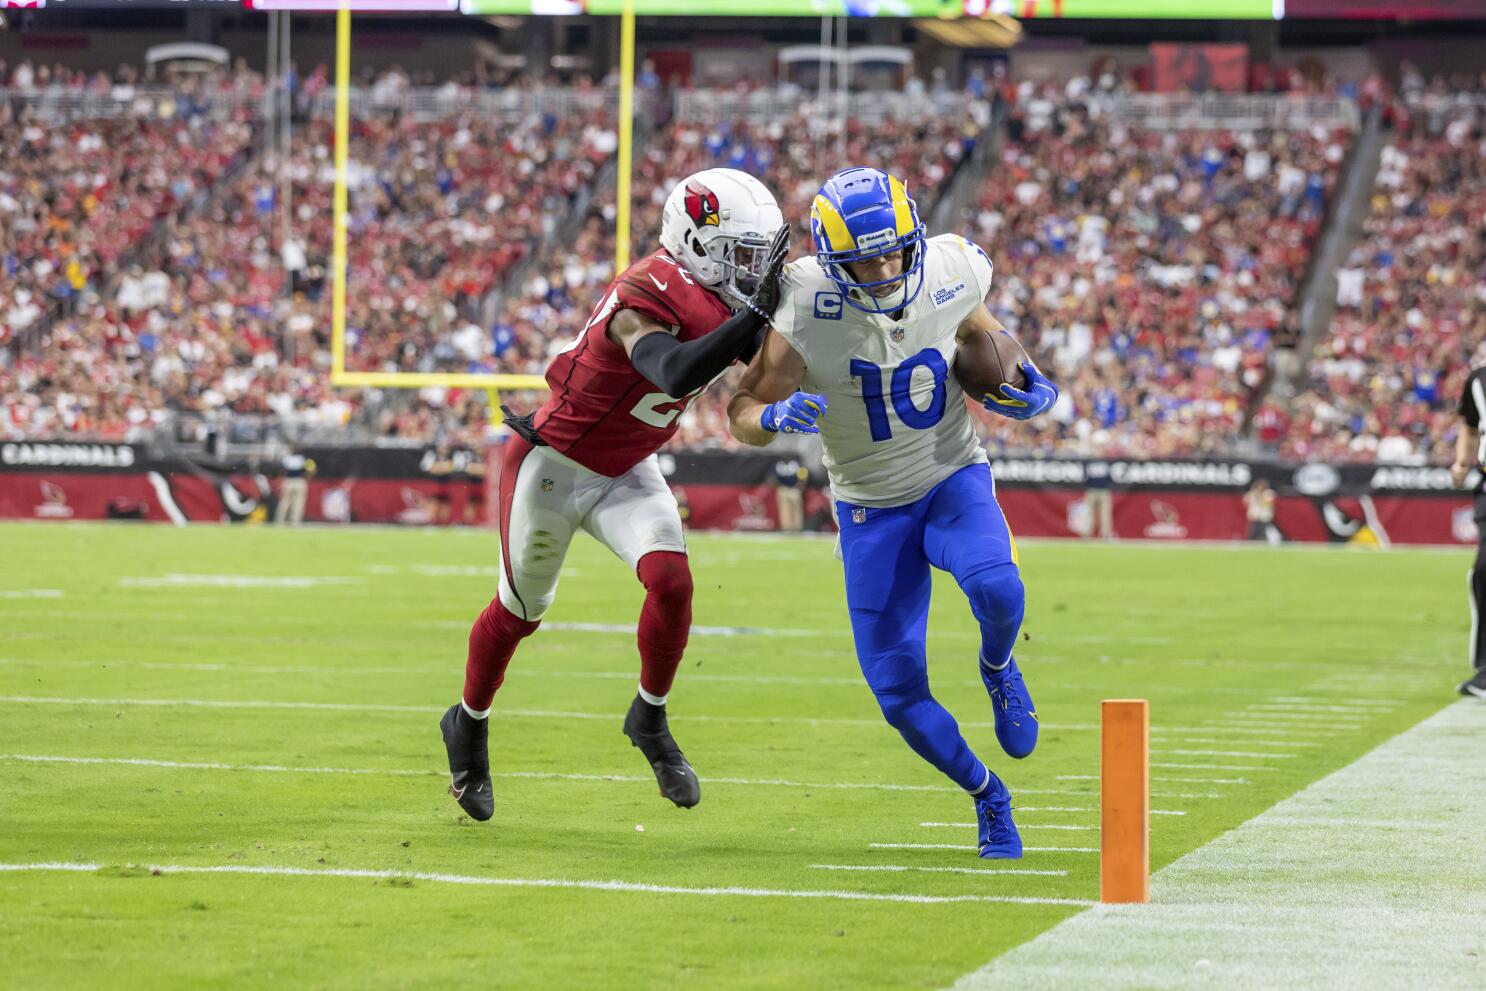 Bickley: Cardinals win over Rams could lead to next big NFC West rivalry